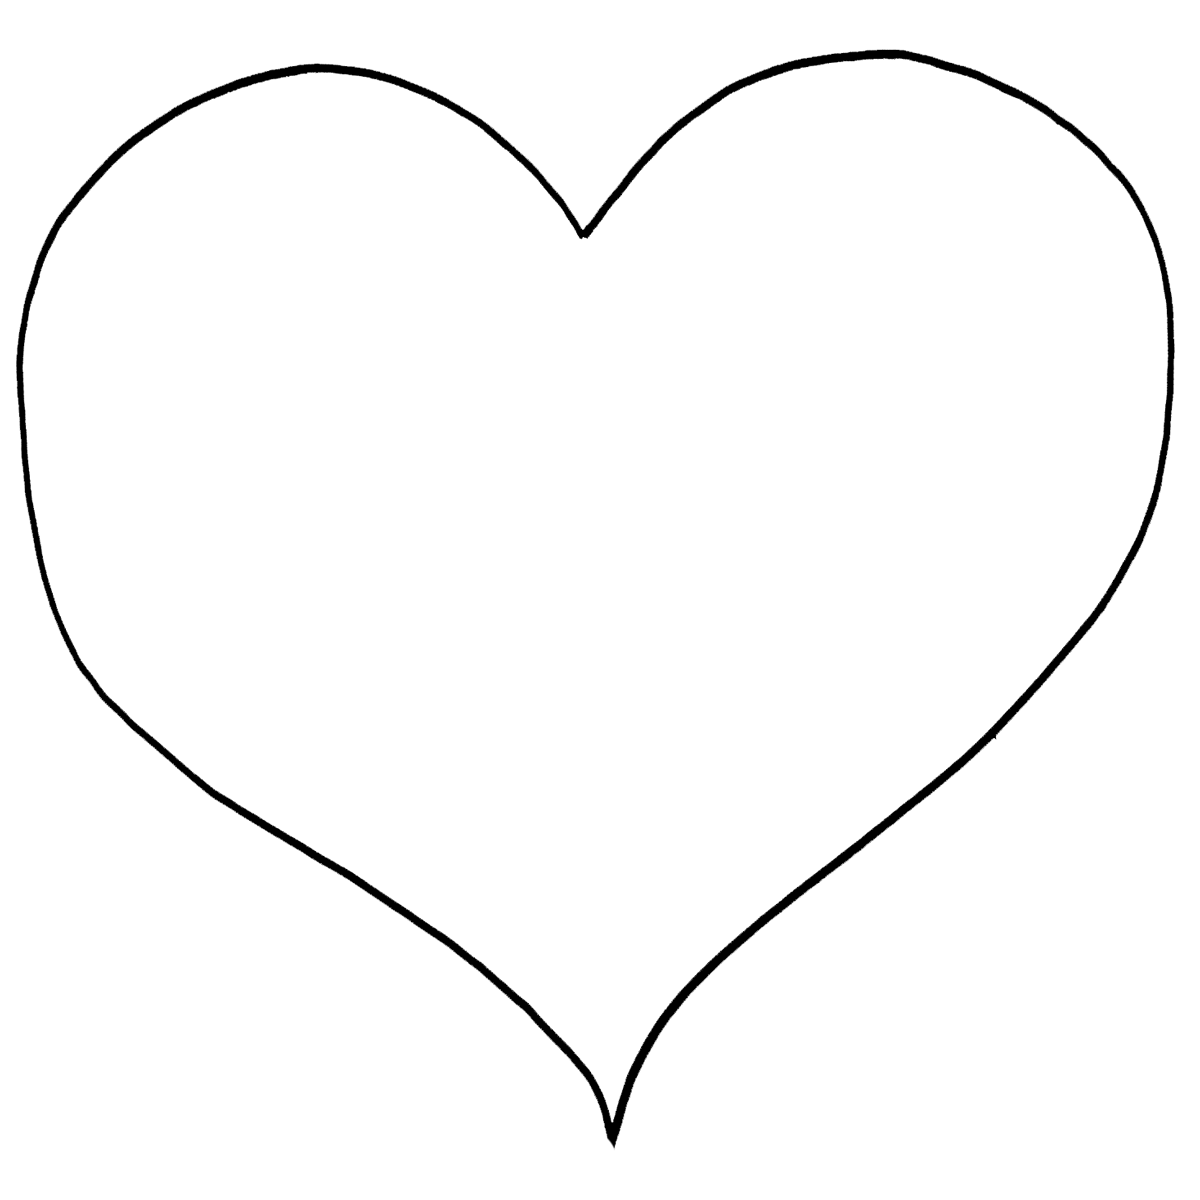 heart coloring page free printable heart coloring pages for kids heart page coloring 